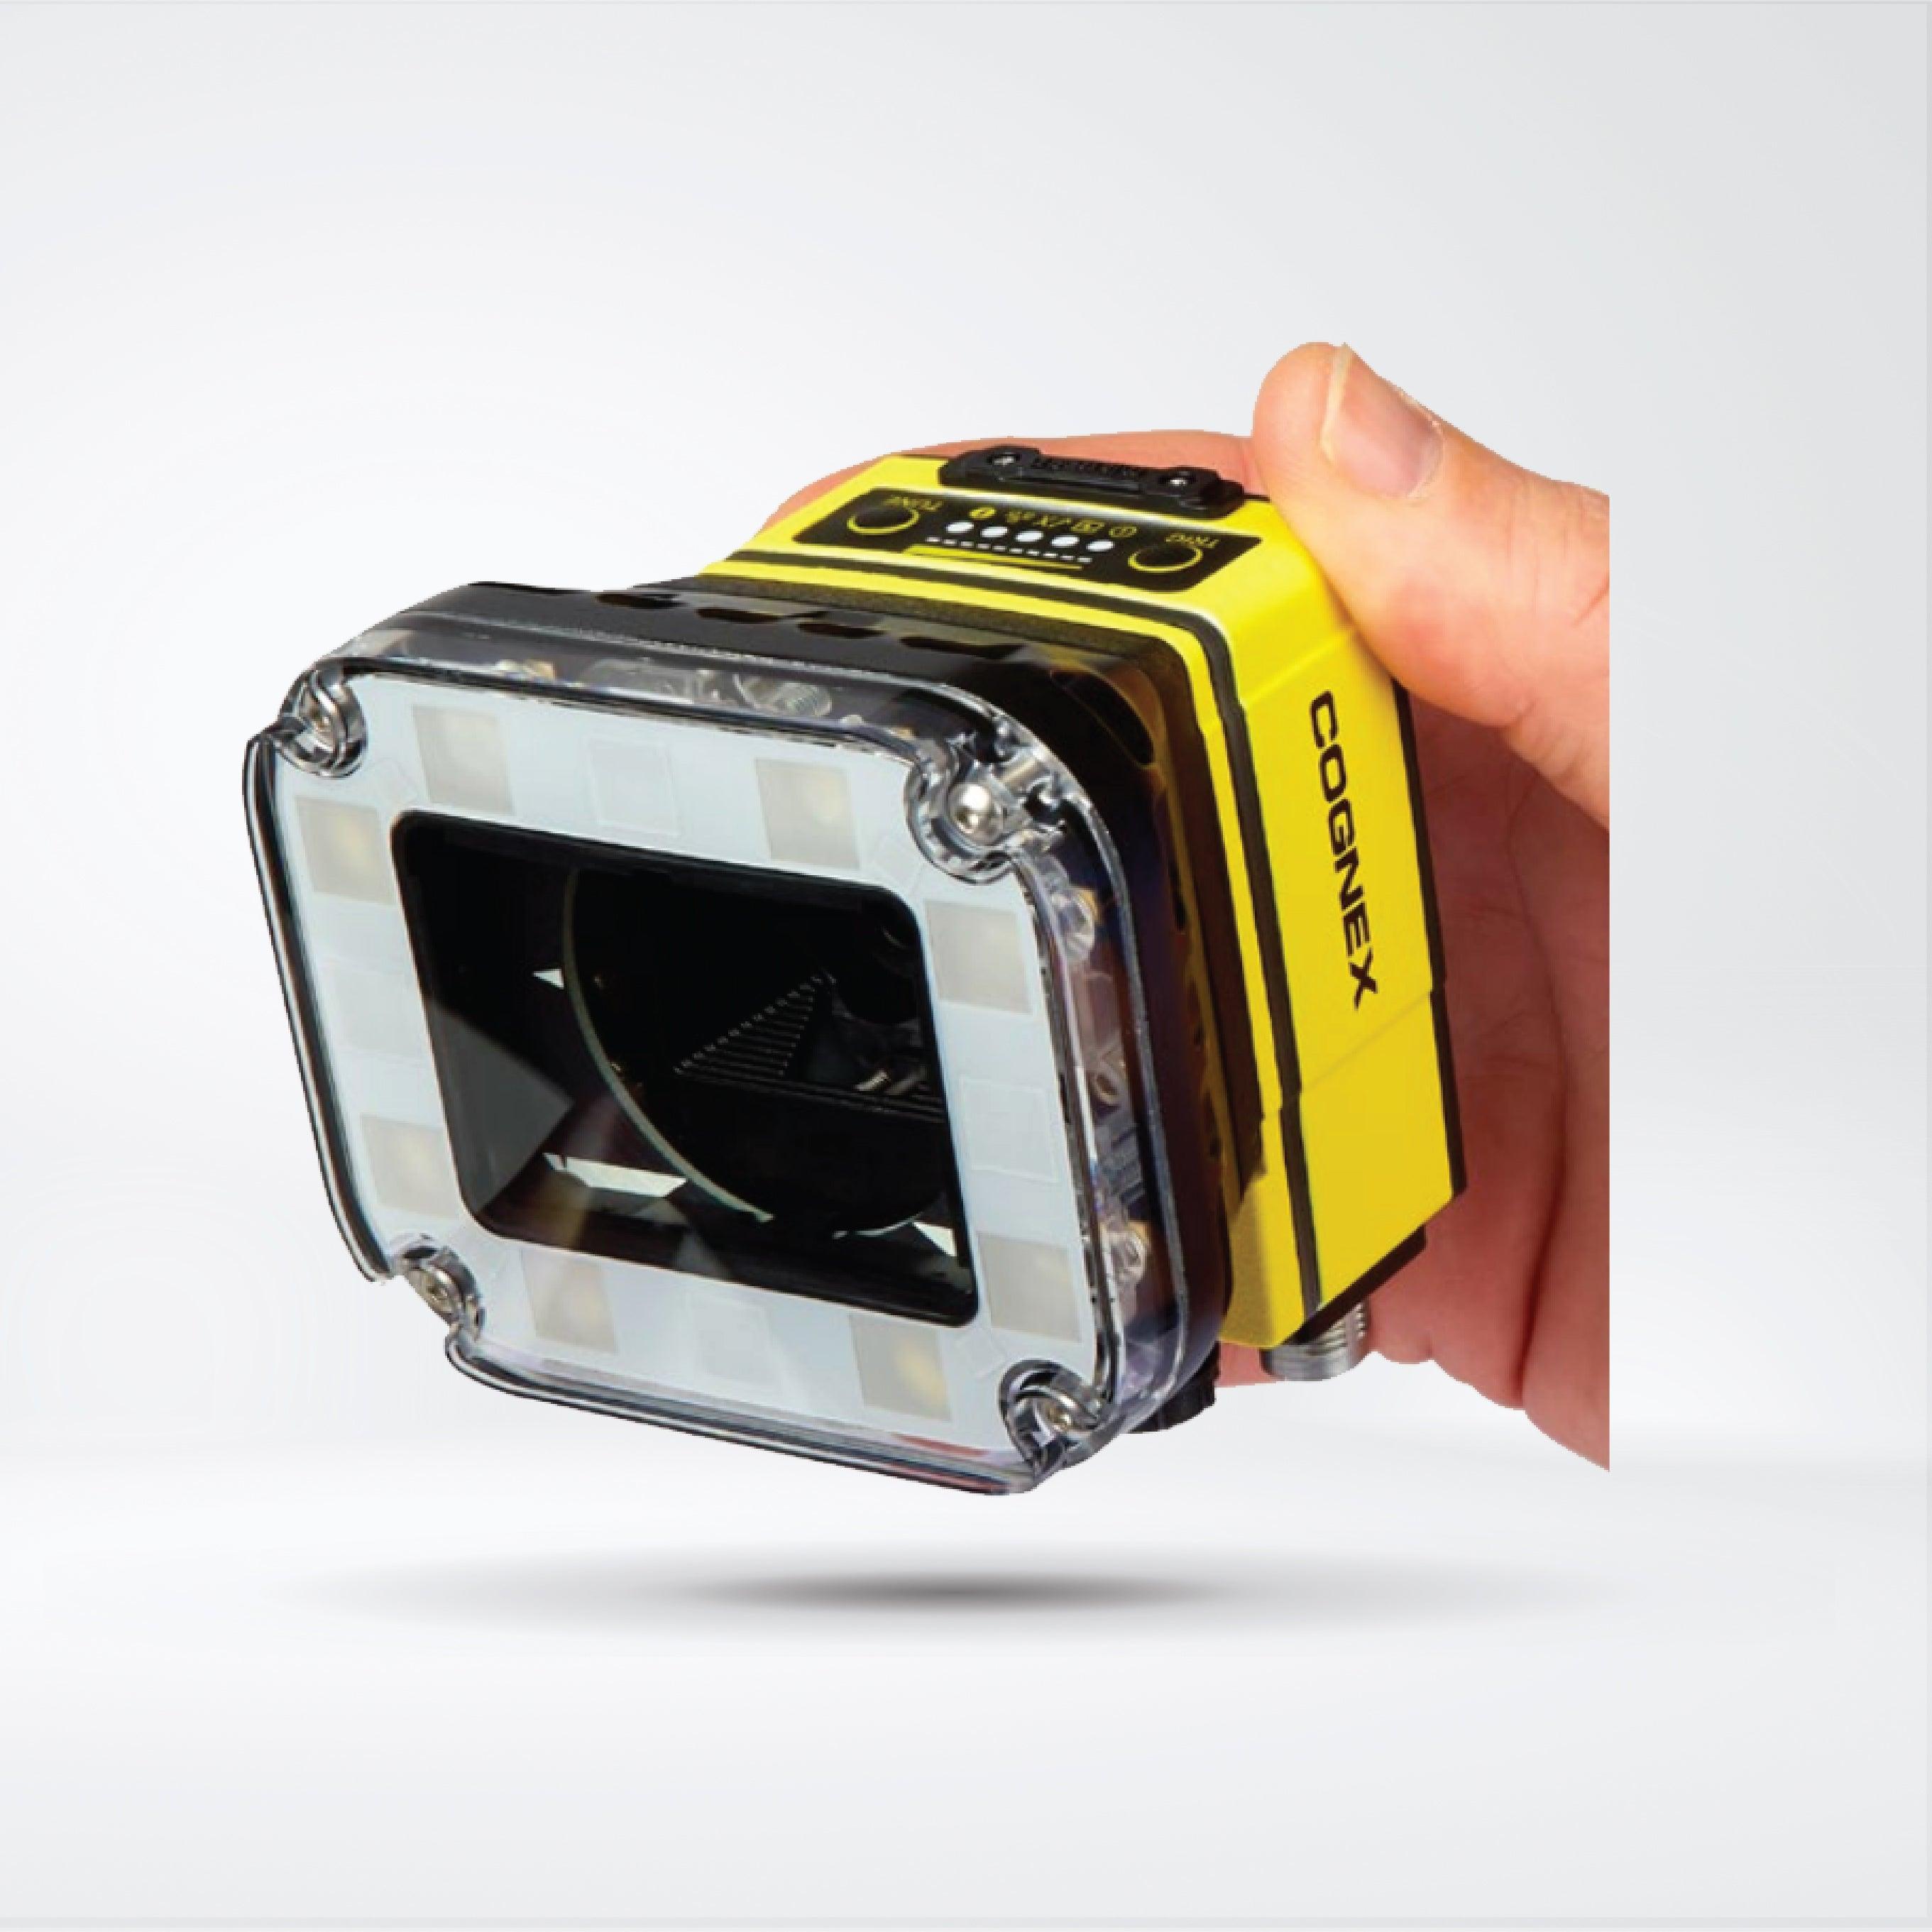 In-Sight 7000 vision system , Rugged, industrial cameras for high performance machine vision applications - Riverplus